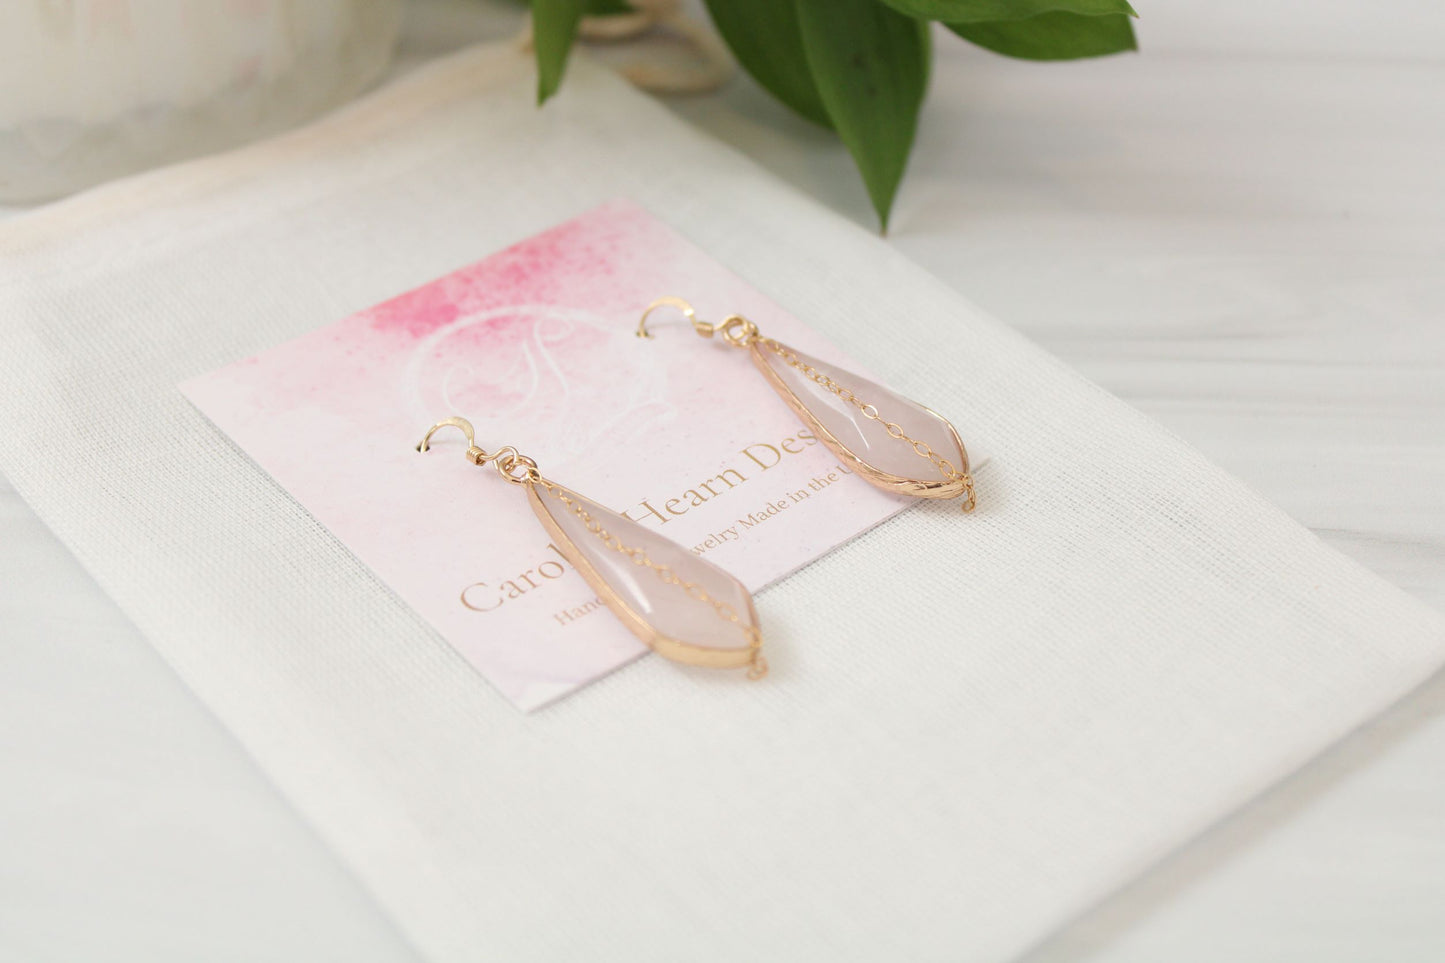 Compassion Earrings